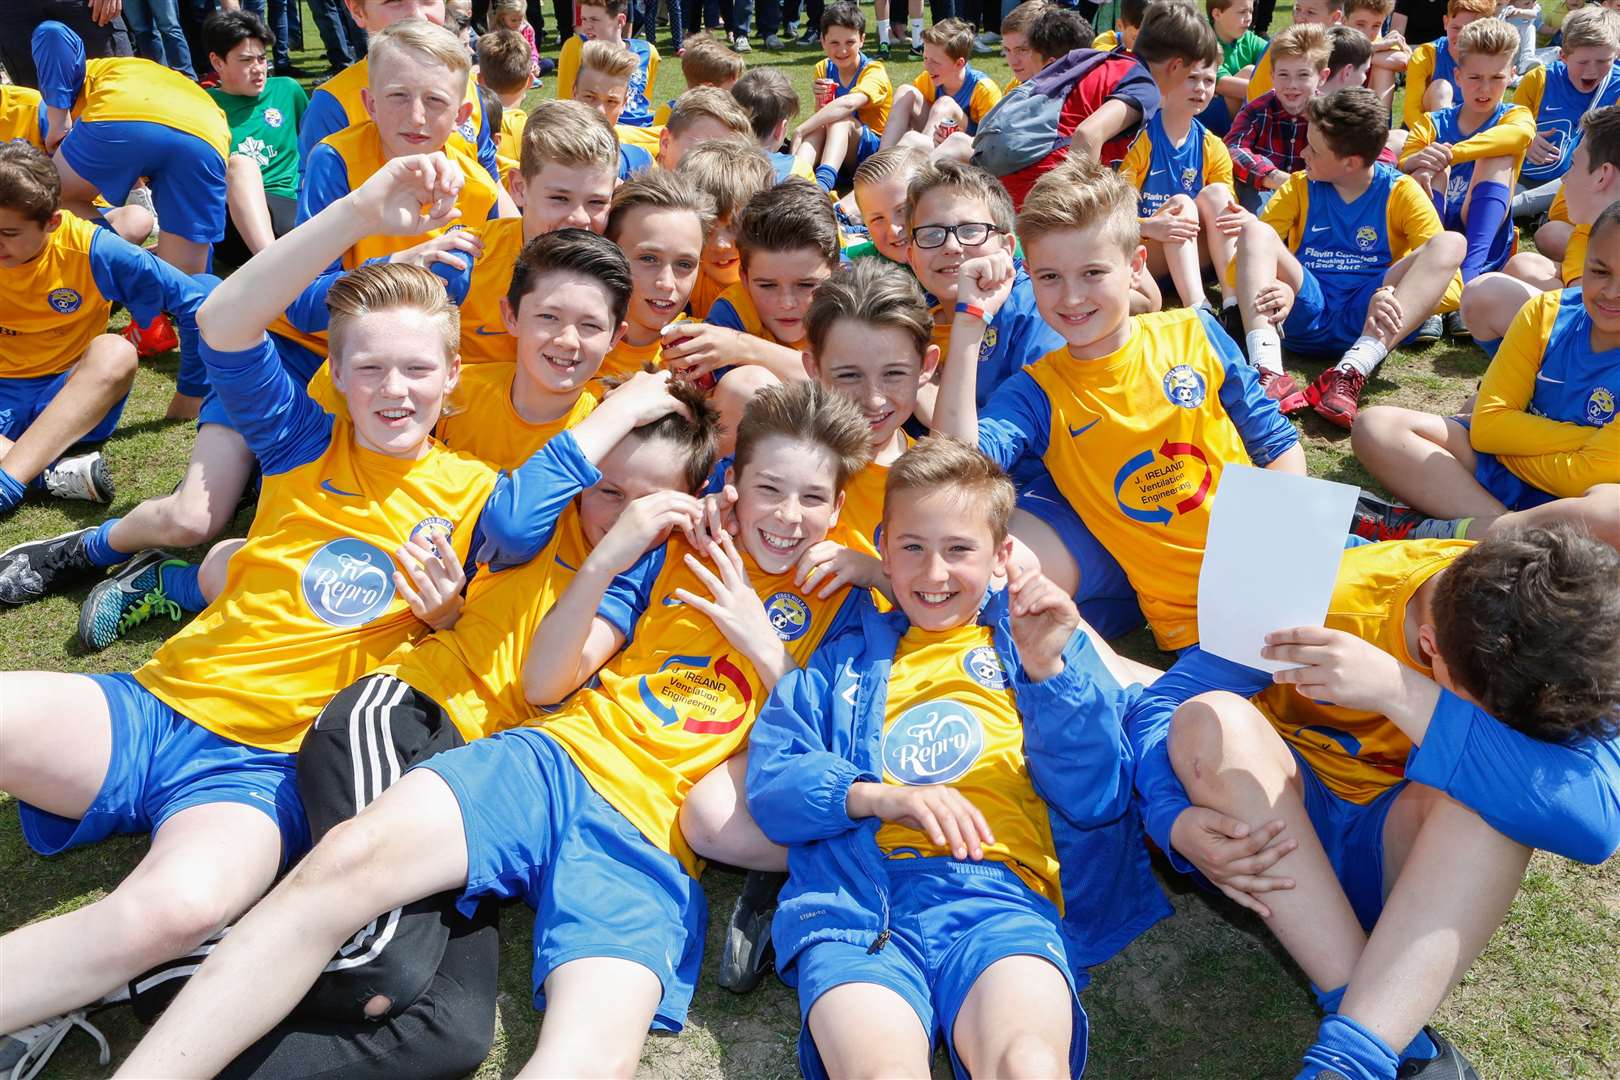 The Kings Hill Sports Club is a popular venue for many young footballers, pictured here at a King Hill FC Fun on the Hill event